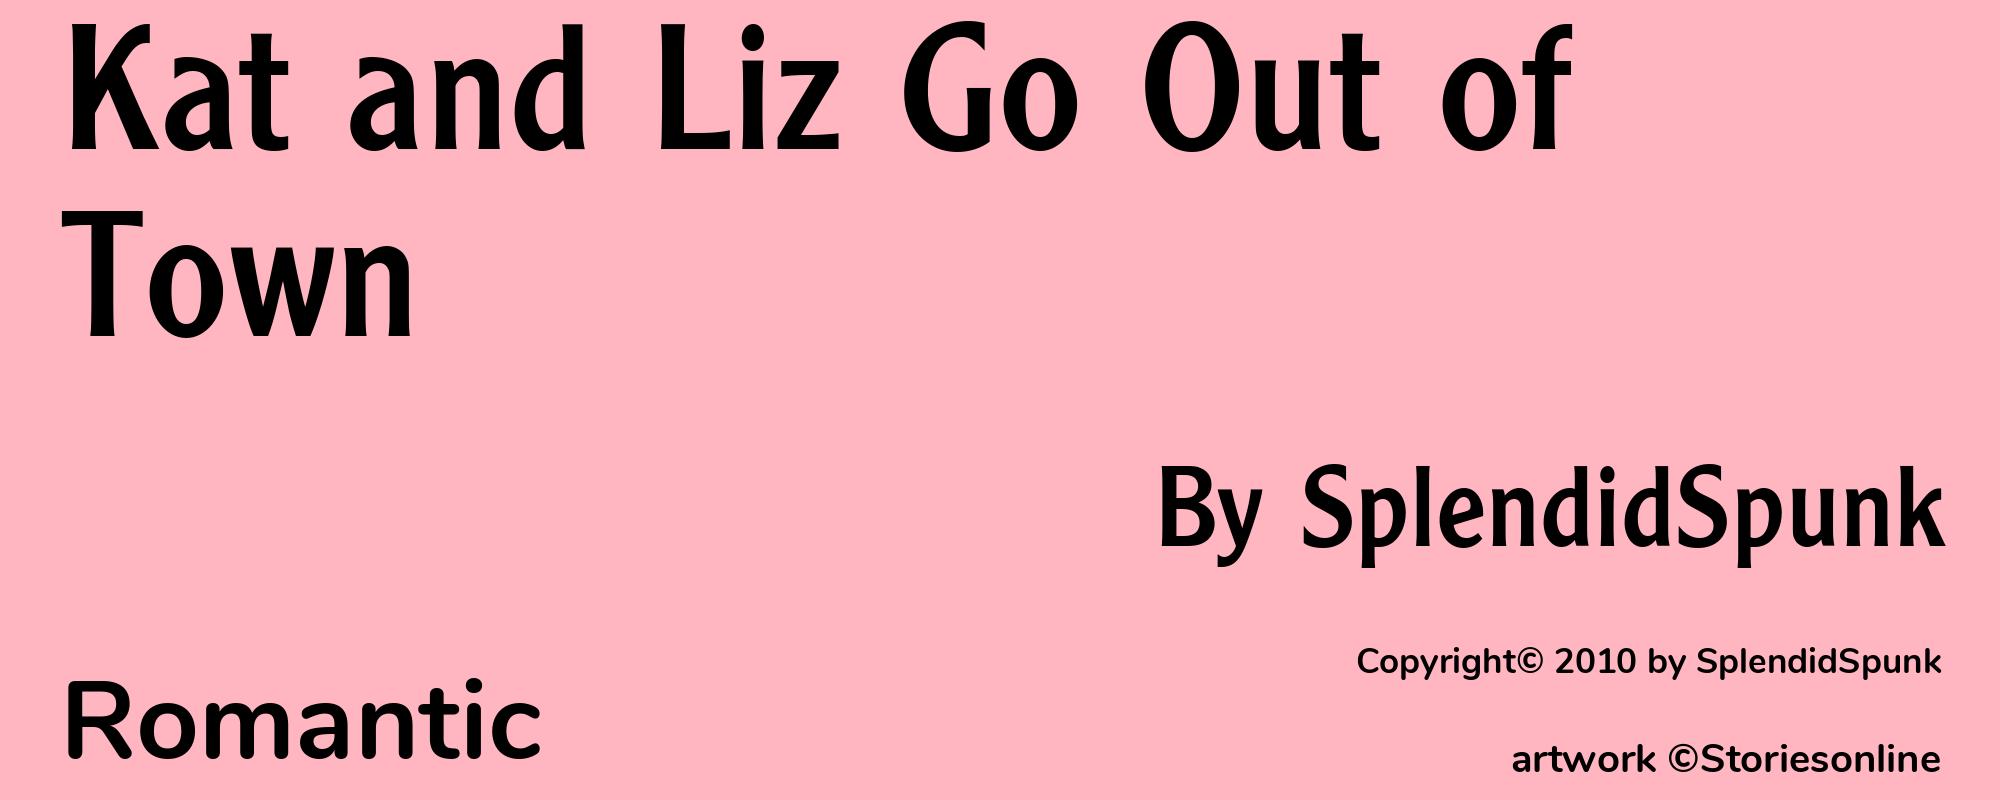 Kat and Liz Go Out of Town - Cover